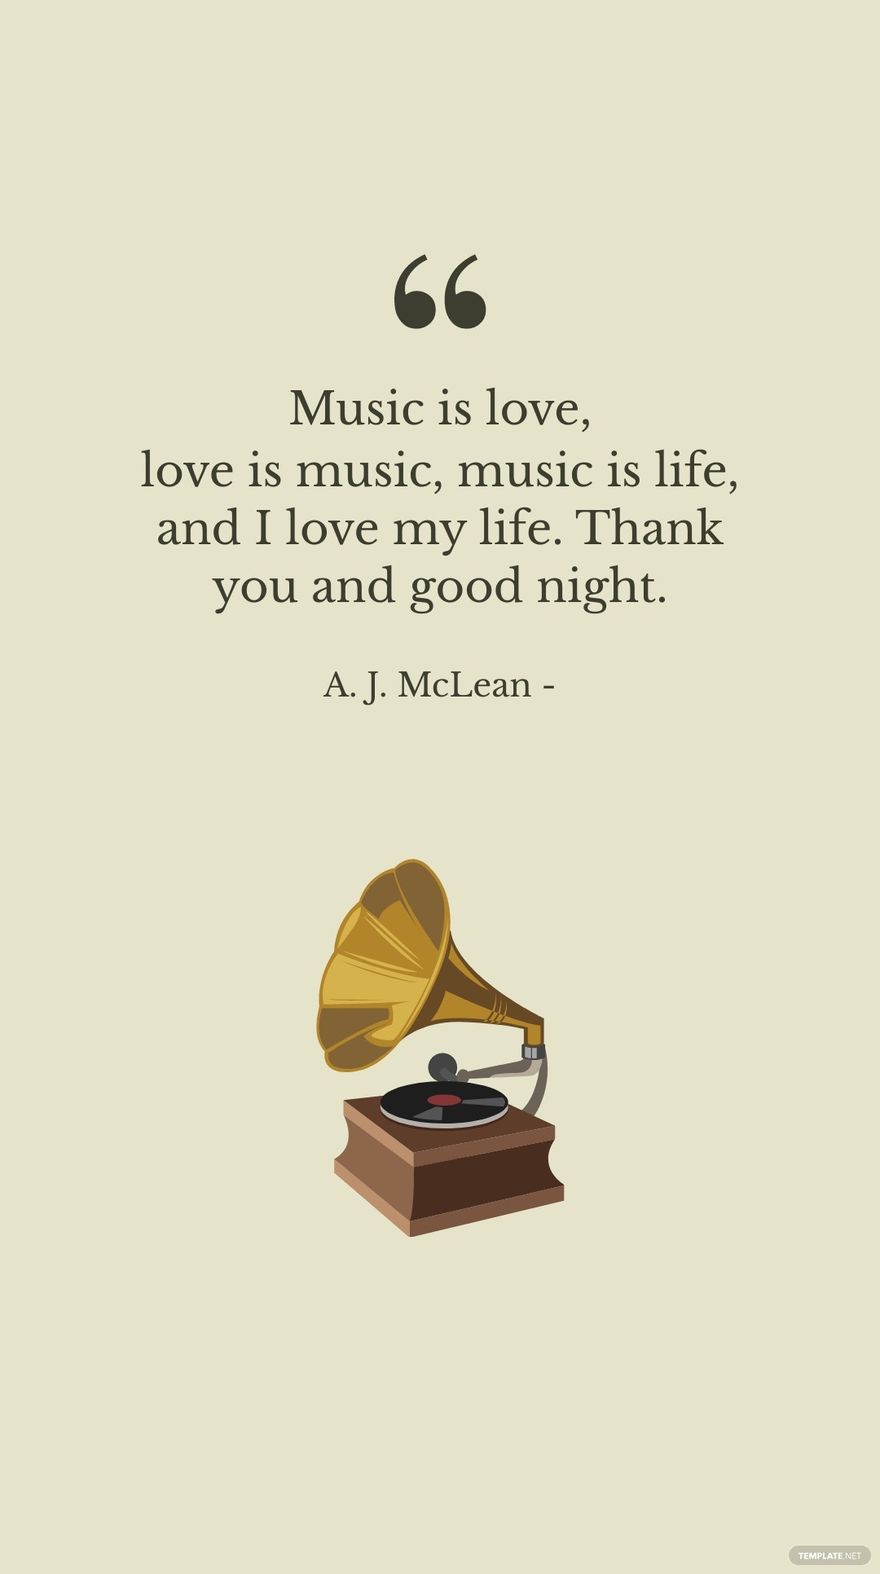 A. J. McLean - Music is love, love is music, music is life, and I love my life. Thank you and good night.